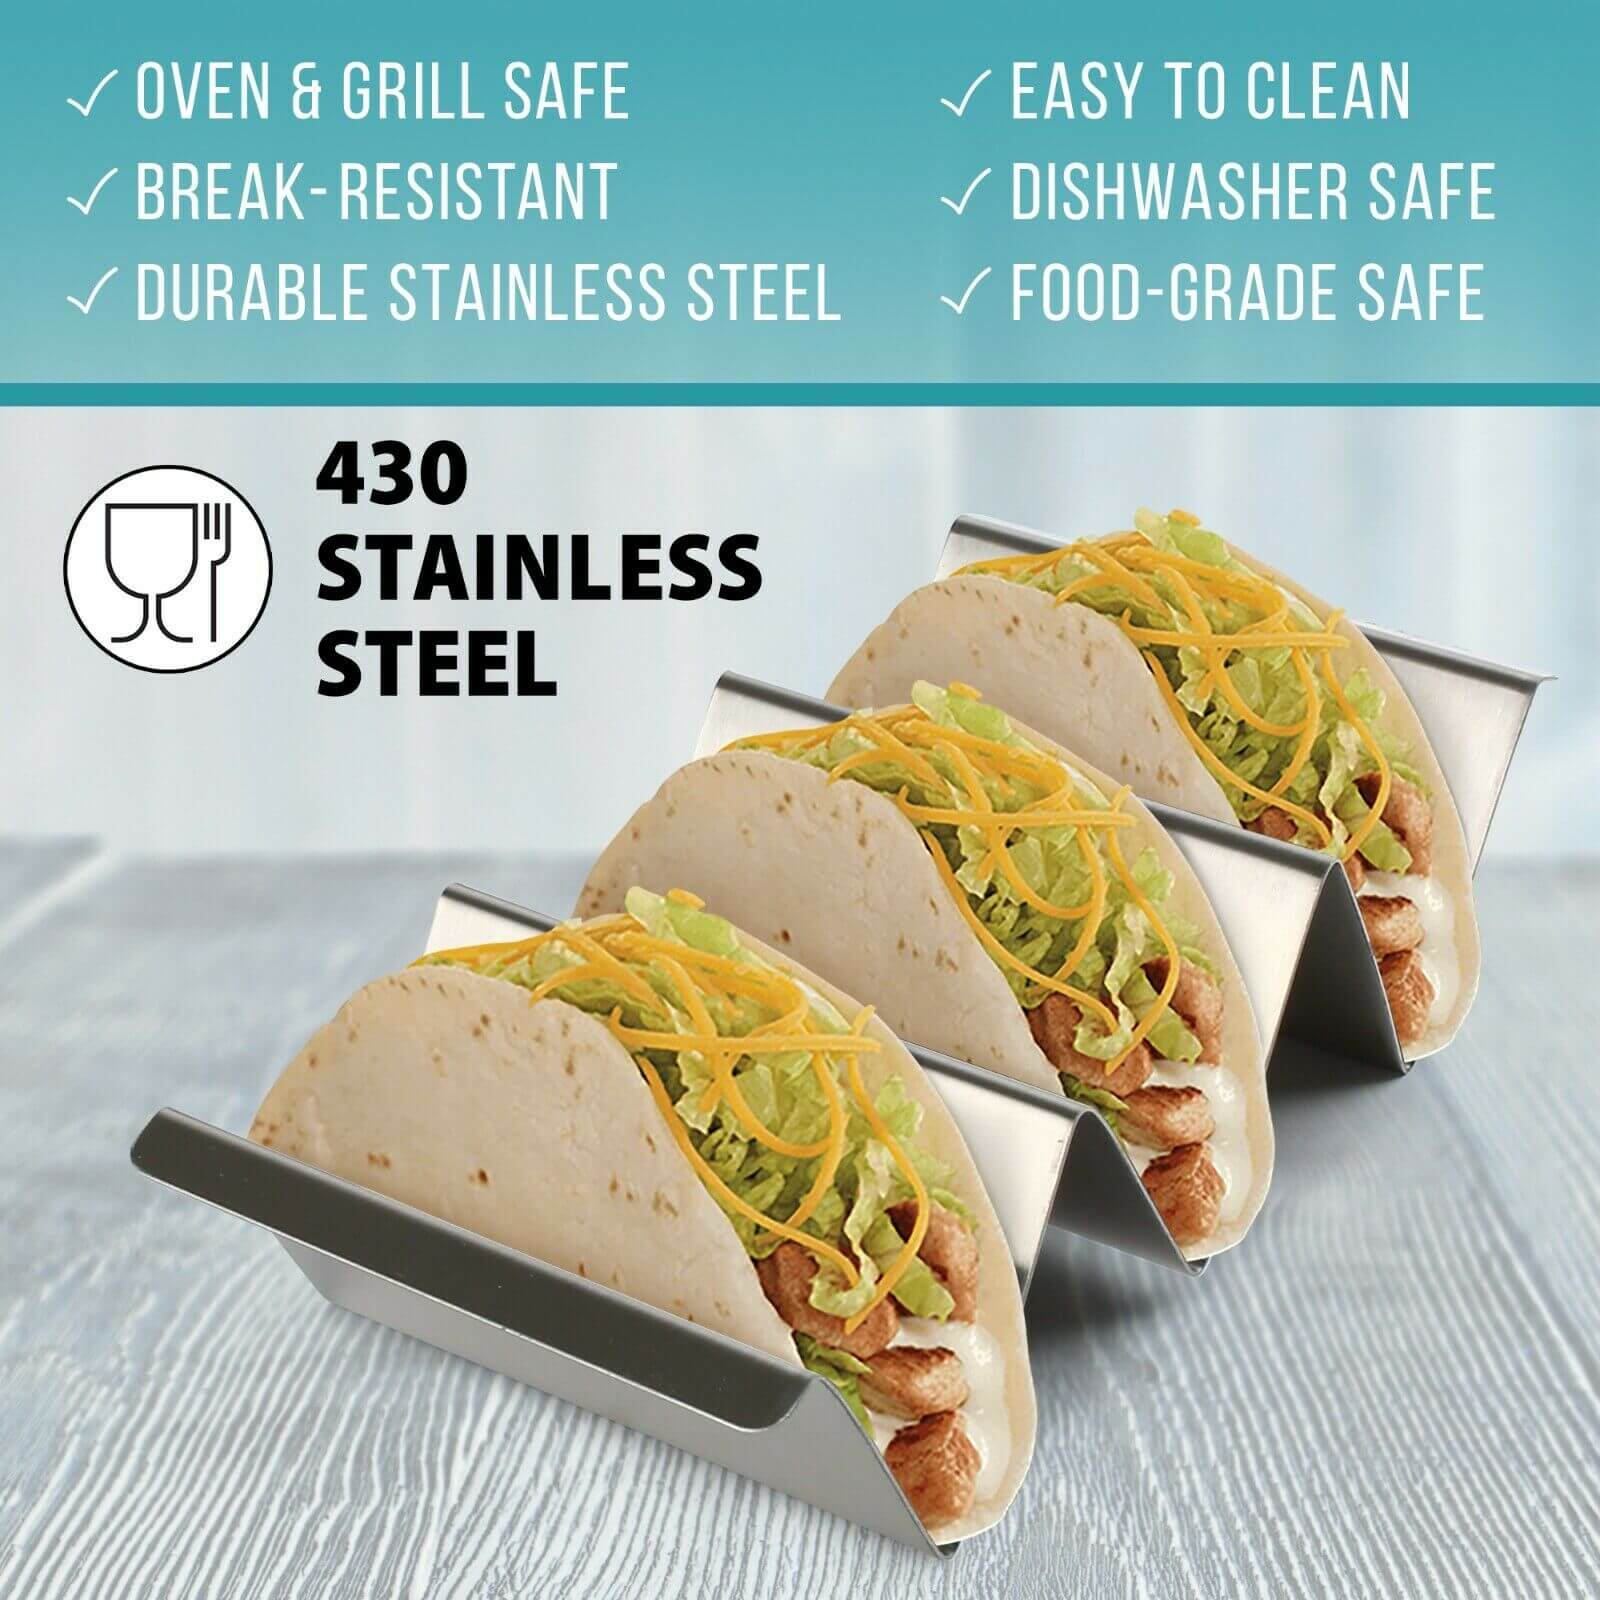 https://www.mykitchenfirst.com/wp-content/uploads/2022/08/4pcs-tacos-tuesday-holder-tray-set-stainless-steel.jpg